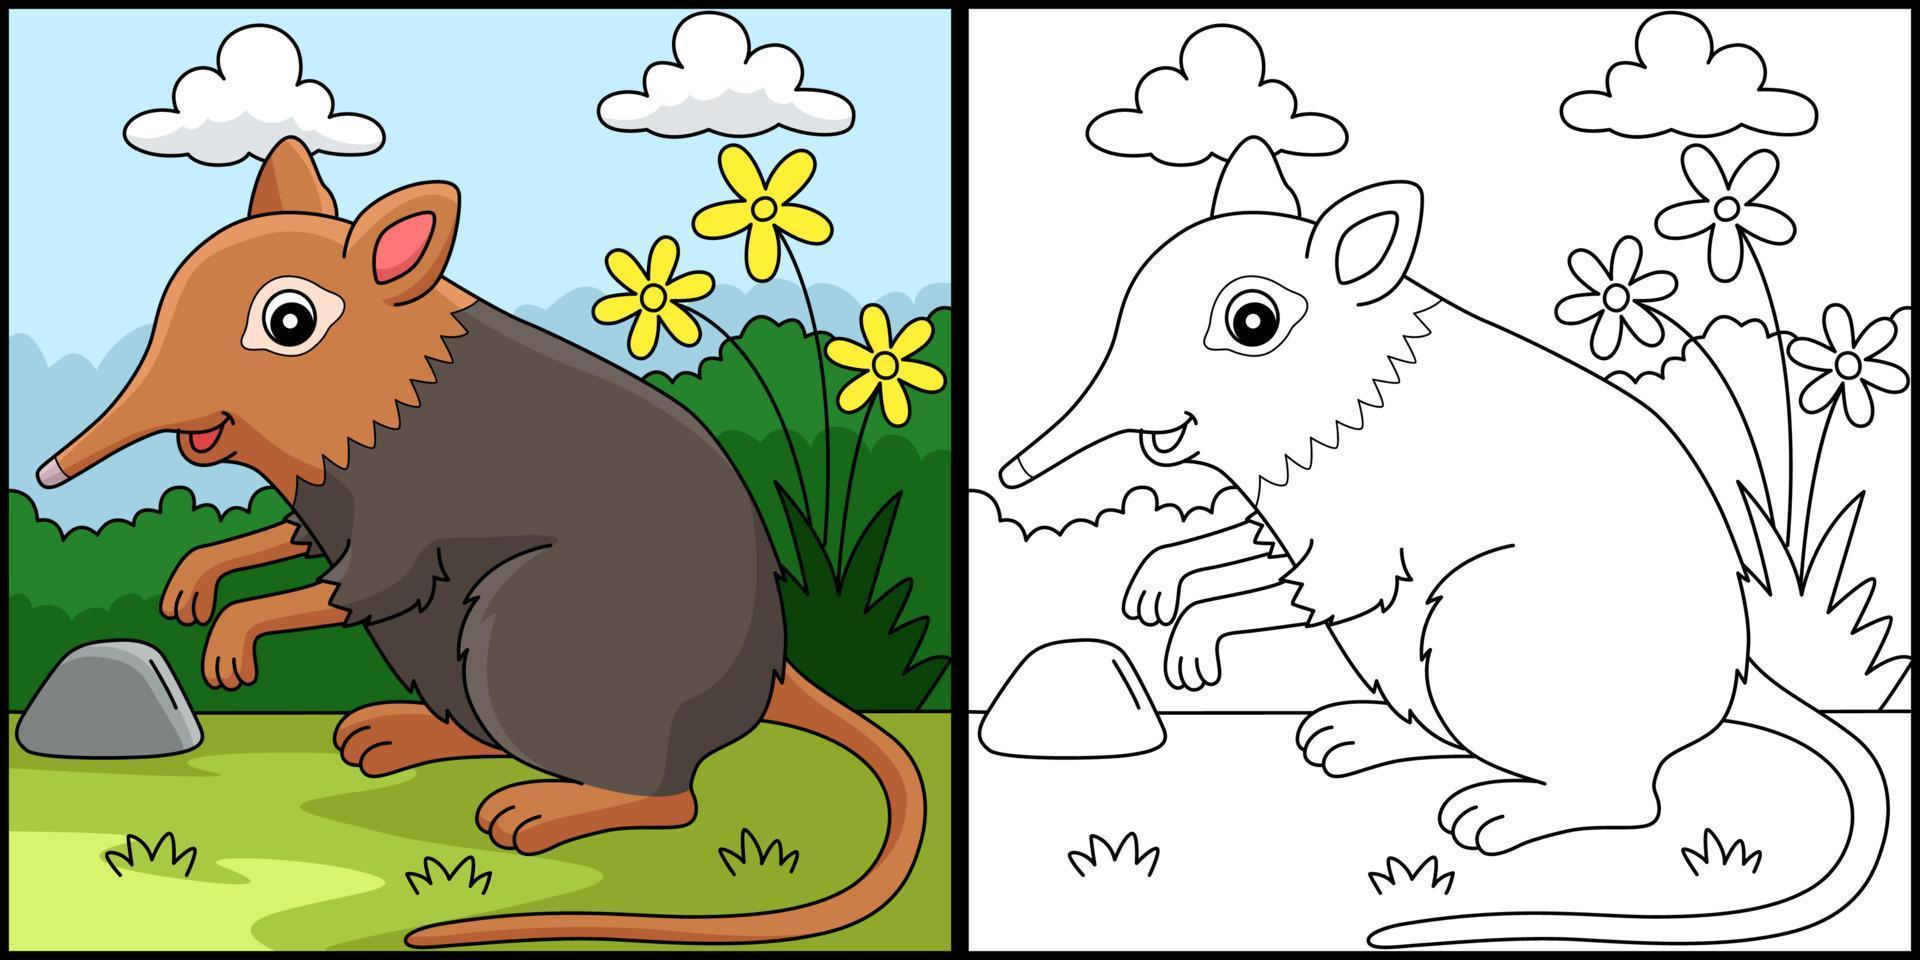 Elephant Shrew Animal Coloring Page Illustration vector